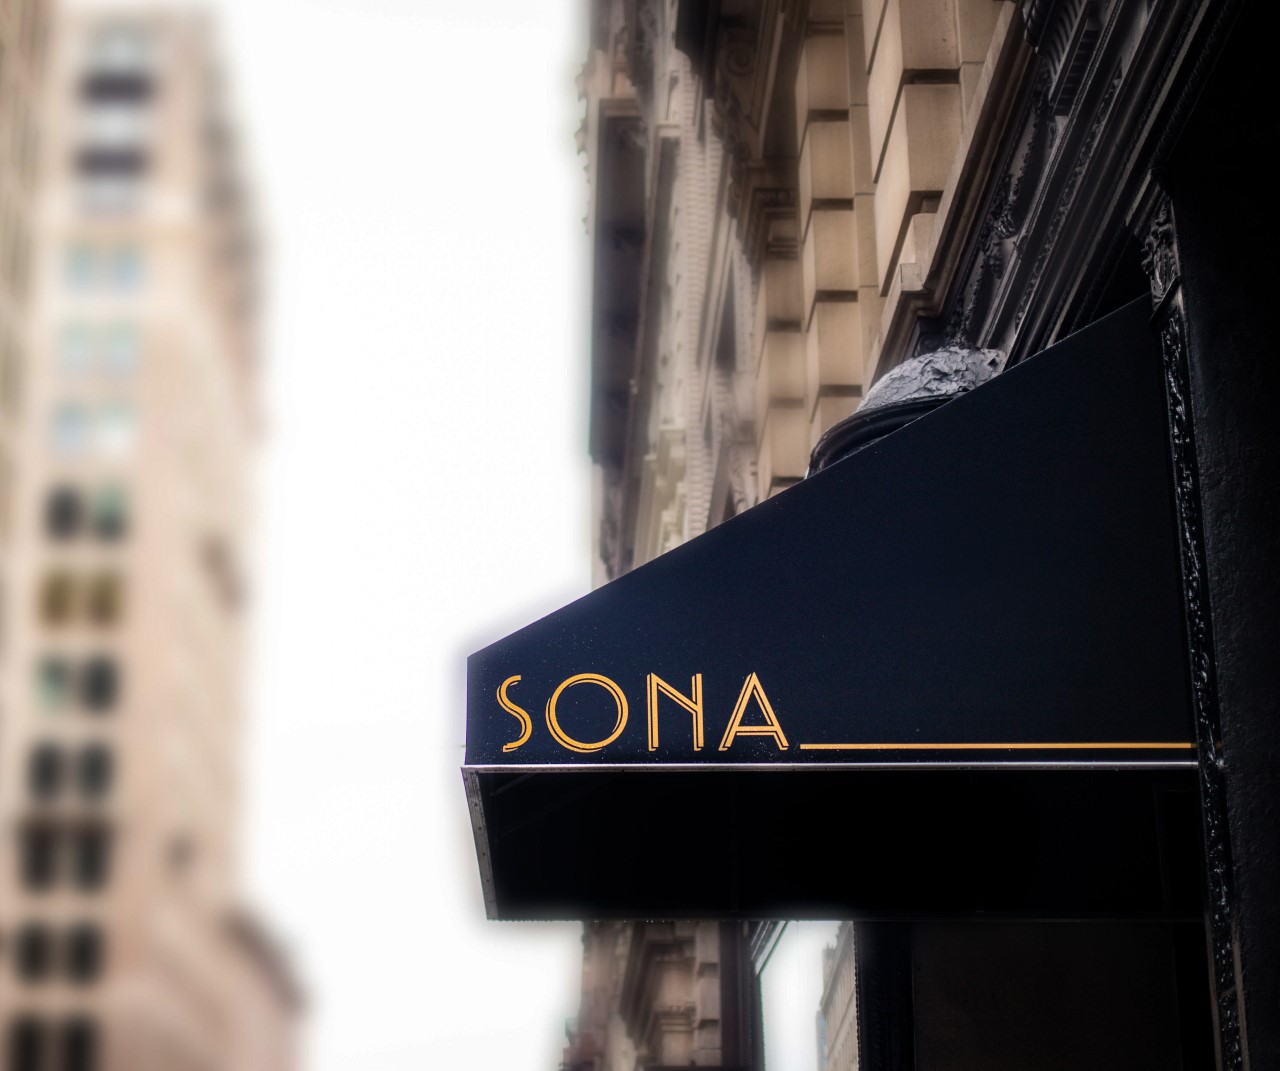 The exterior awning of a restaurant called Sona